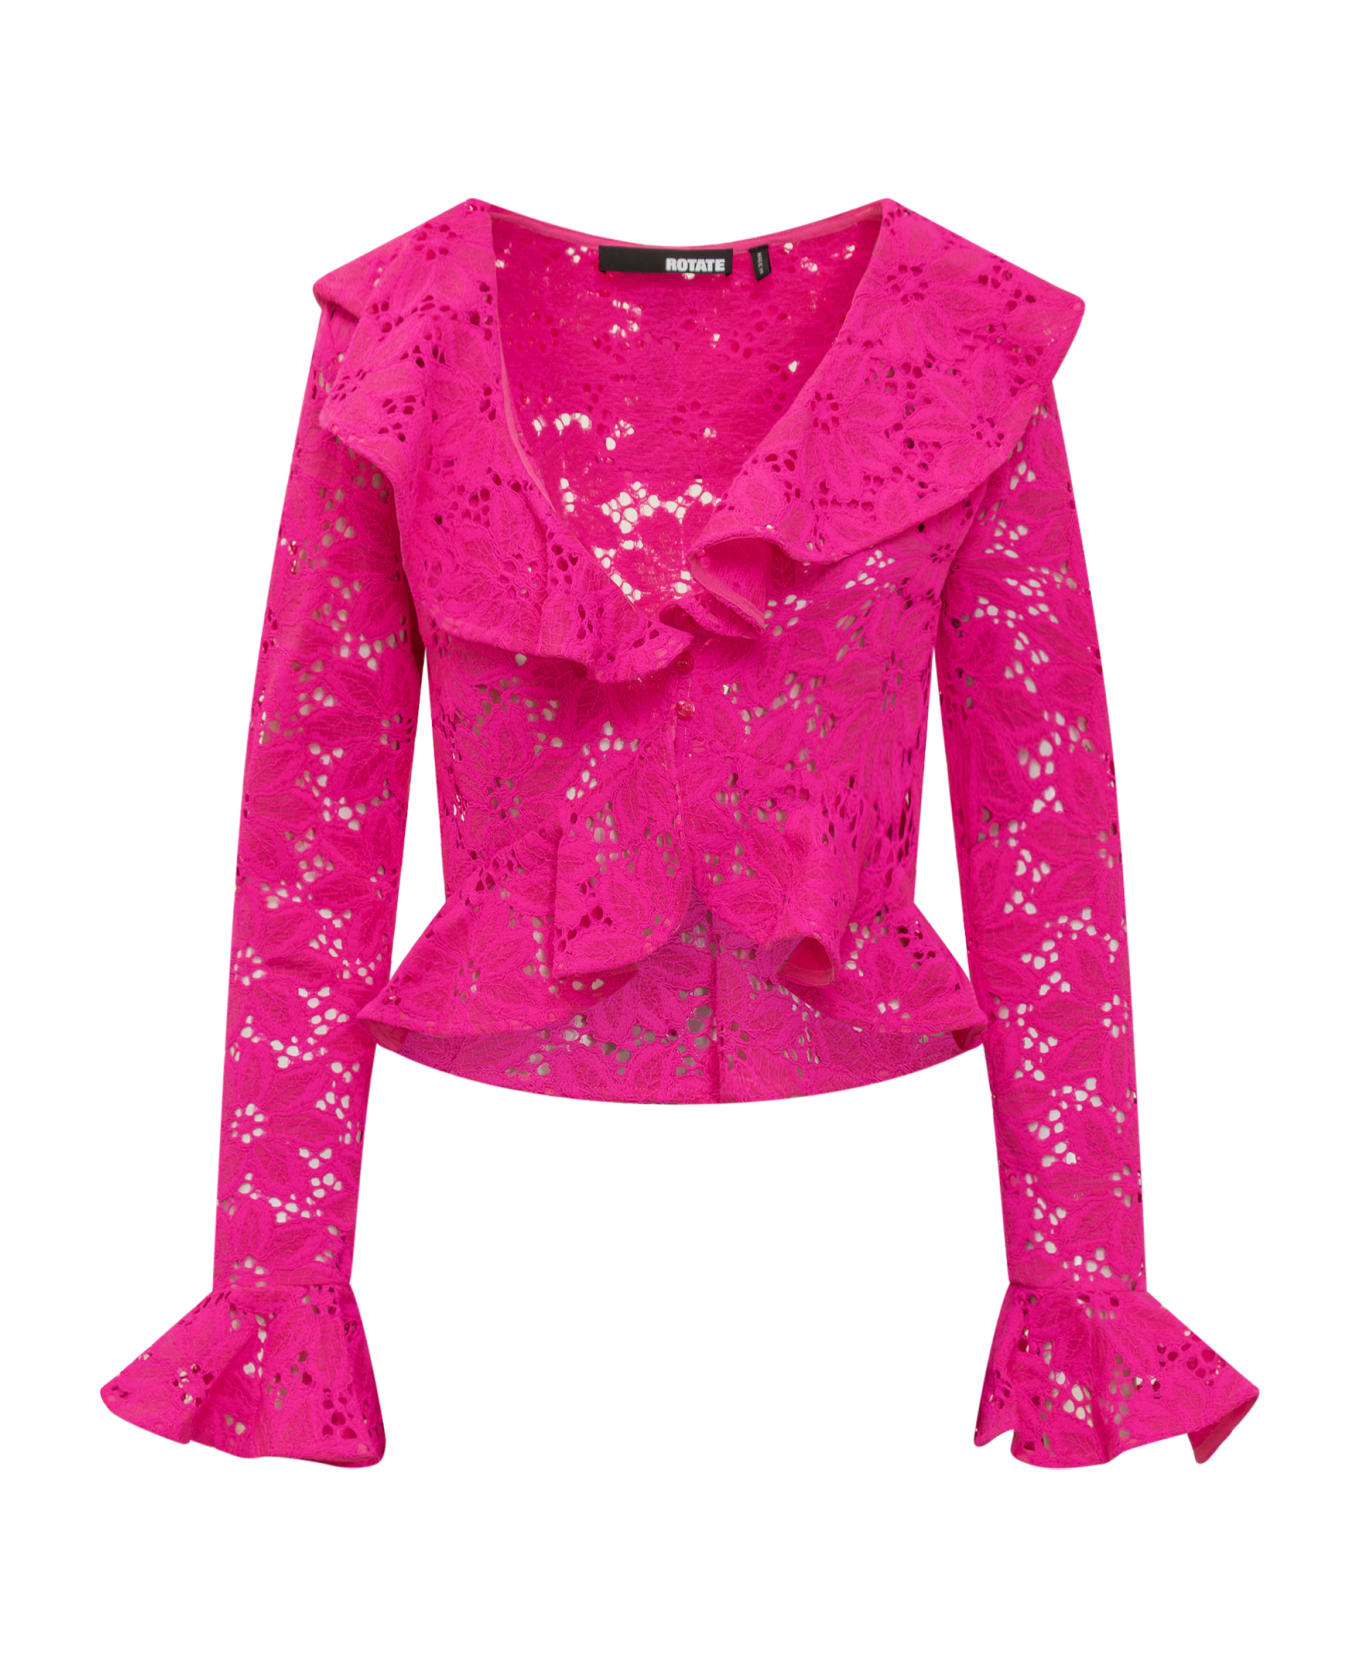 Rotate by Birger Christensen Heavy Lace Top - PINK GLO